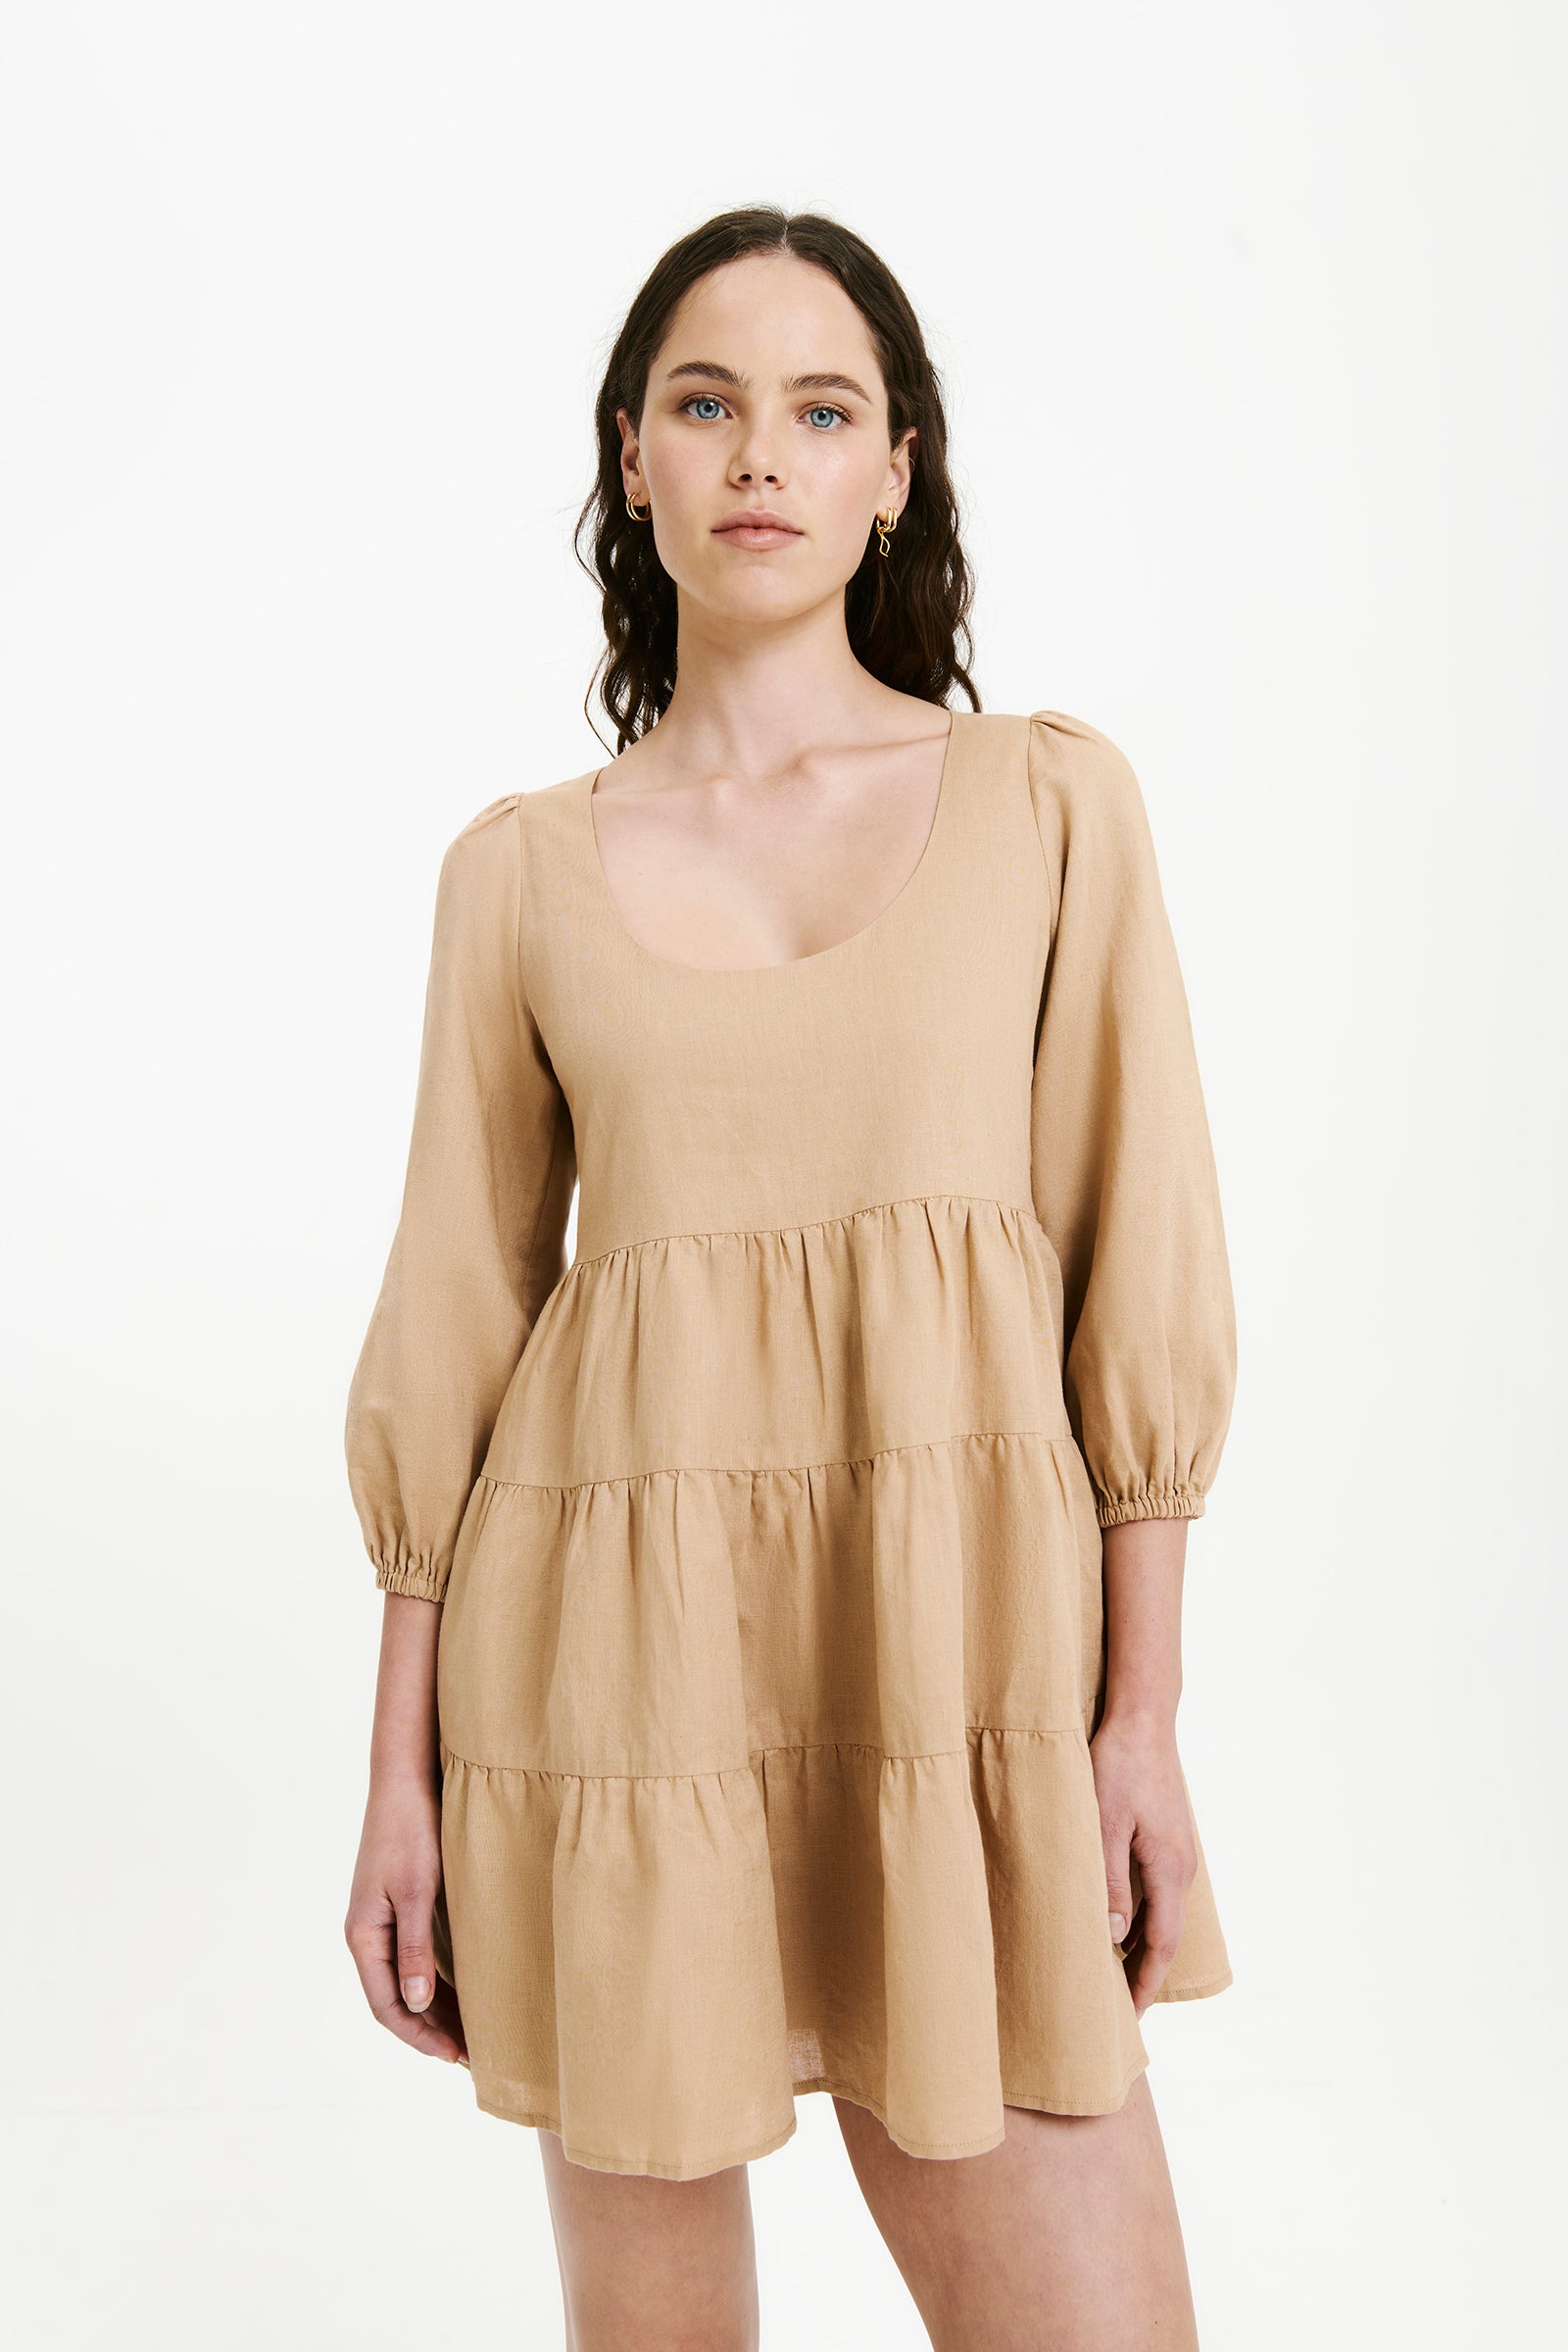 Nude Lucy Brooke Mini Dress In A Light Yellow Toned Dune Colour